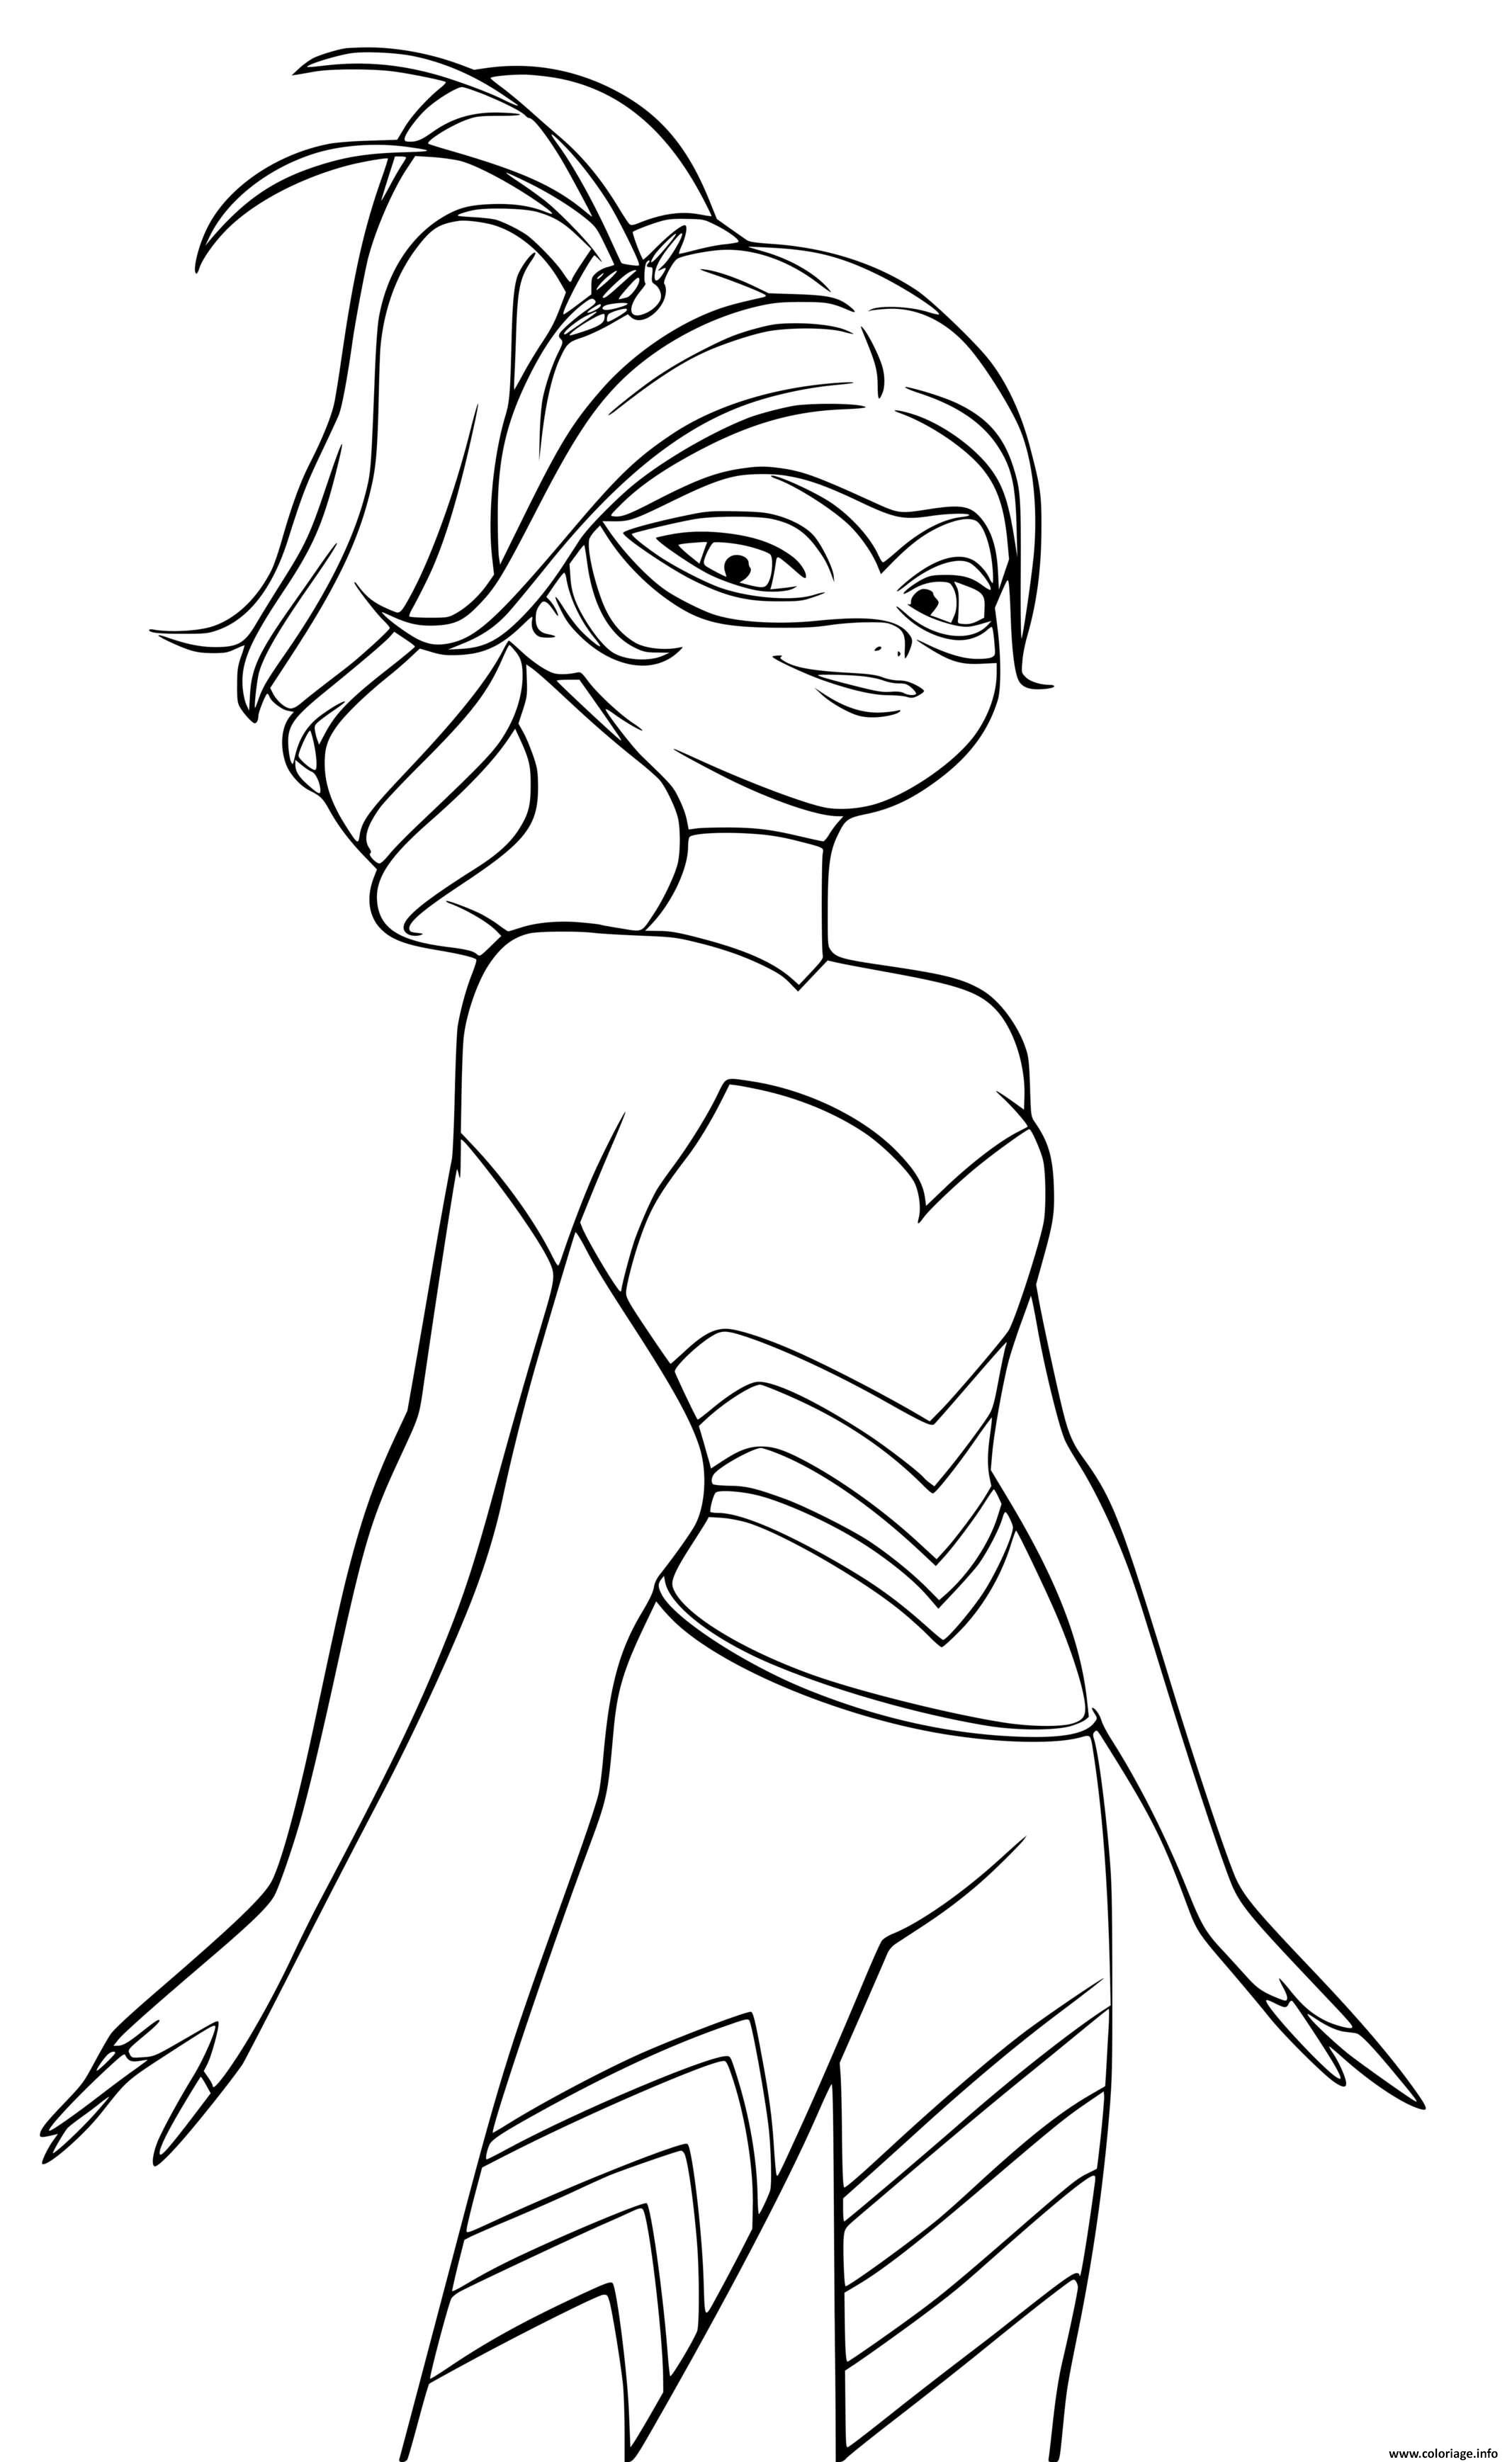 Coloriage Miraculous Ladybug Queen Bee Or Chloes Dessin Ladybug